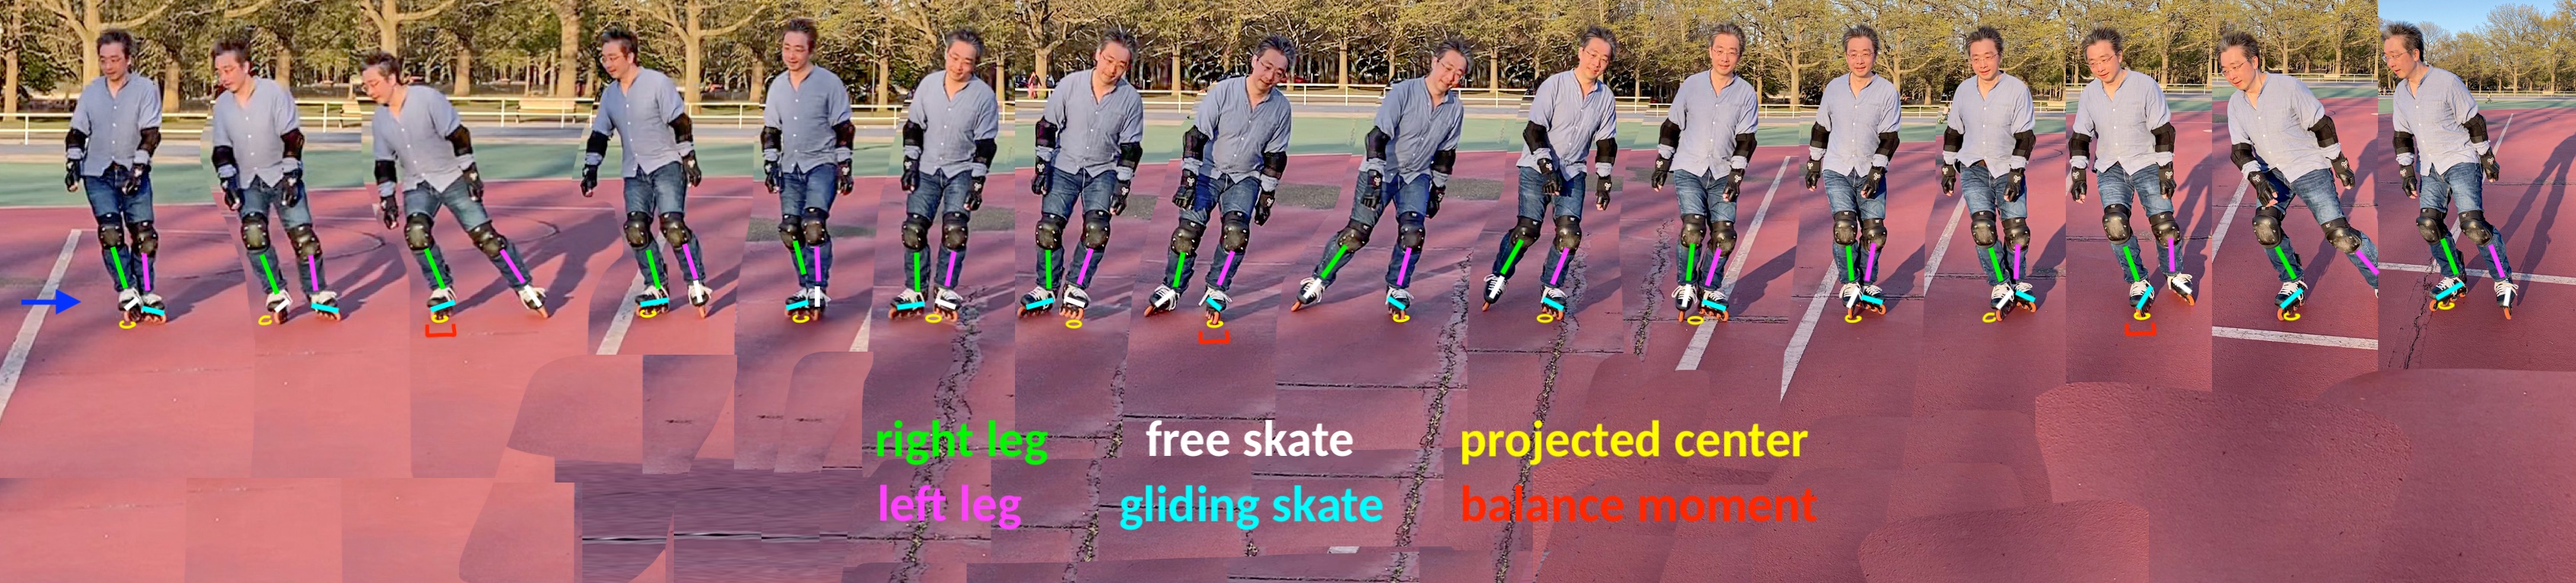 Here is an annotated sequence of this zig-zag gliding exercise. Find a skating trail that is wide enough. Say at least 12 feet across. Or find a skating rink like the one shown in the video. Stand on the left side of the trail at first. Adopt the V step configuration for your skates. First put weight on your left skate. Then turn your shoulder rightward to look at roughly 2 o’clock. Train your eye on a point on the right side of the trail. Now point your right skate towards that point, lunge head first, and glide on your right skate to that point. When you almost reach this point on the right side of the trail, switch focus to your left skate. Turn your shoulders towards 10 o’clock, and aim at a new point on the left side of the trail. Lunge head first, and glide towards that point on your left skate. When you reach the left side, repeat.